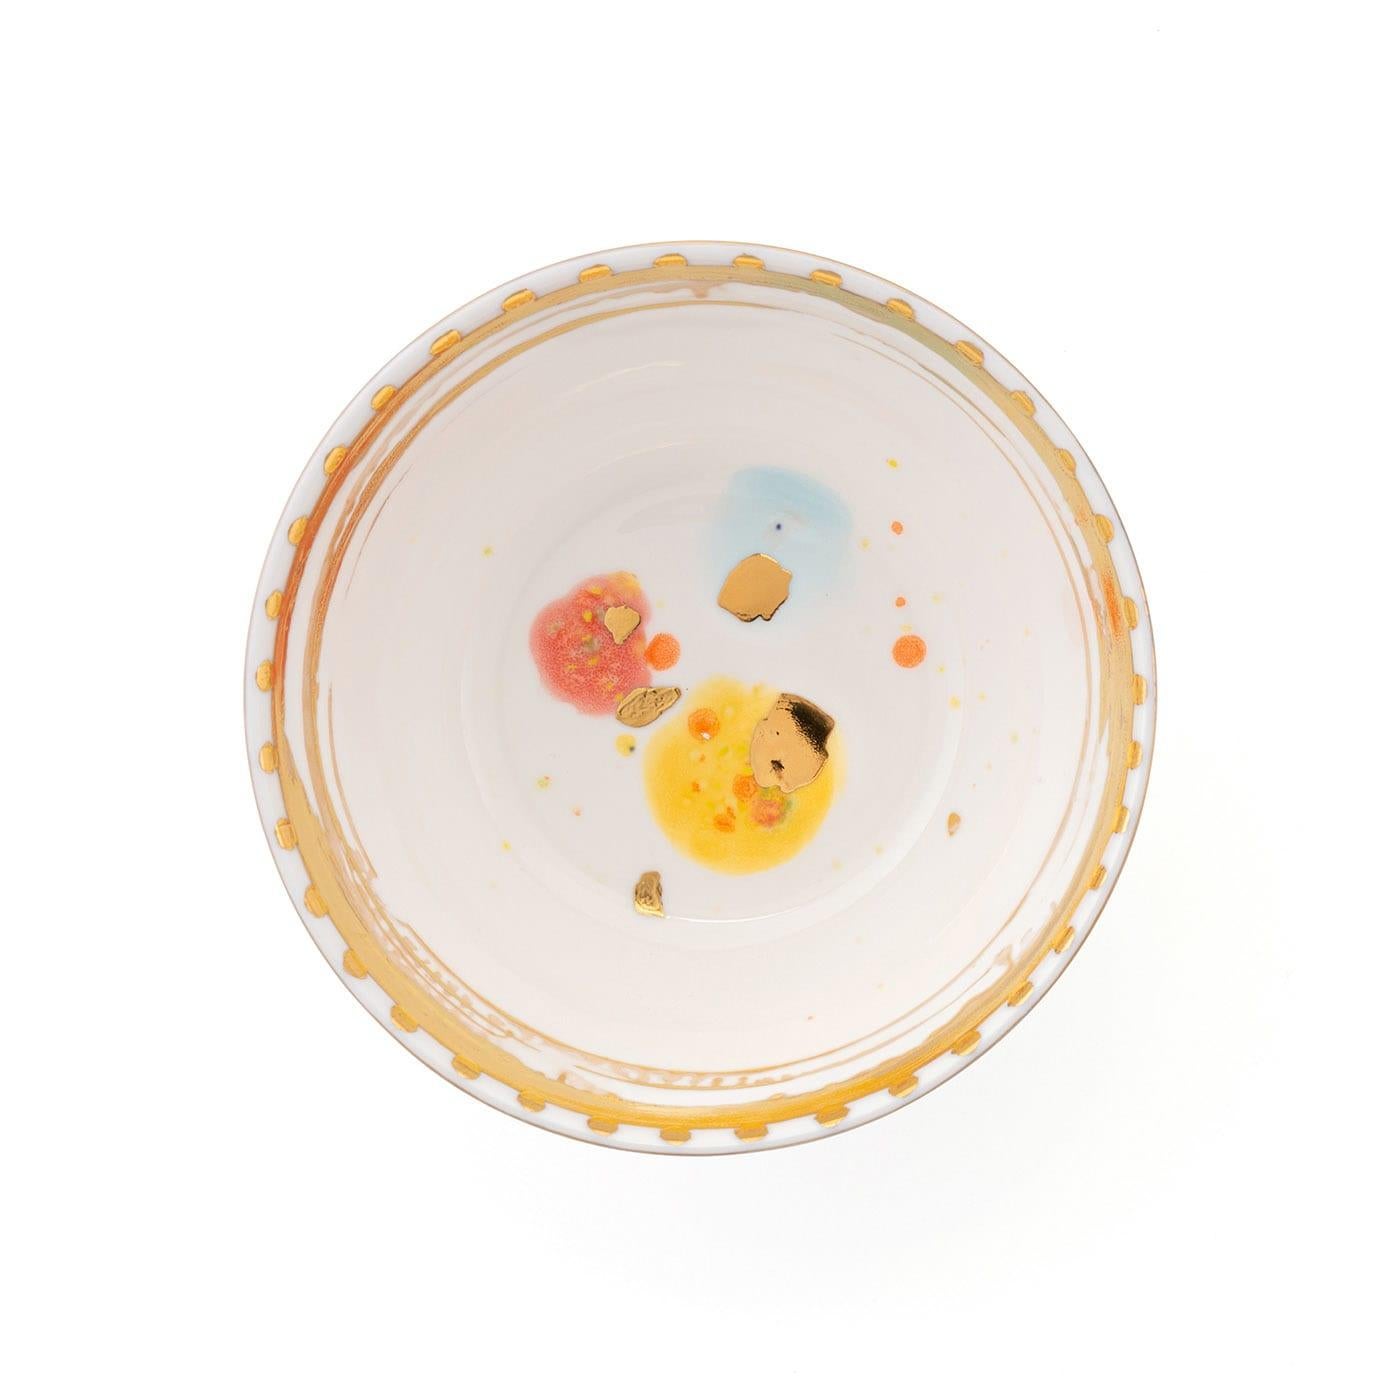 Recalling the splendor of Baroque art embodied by Caravaggio, this superb set of two porcelain fruit bowls is minutely crafted and decorated by hand. The combination of red, yellow, and light blue spots creates a lively decoration ennobled by the